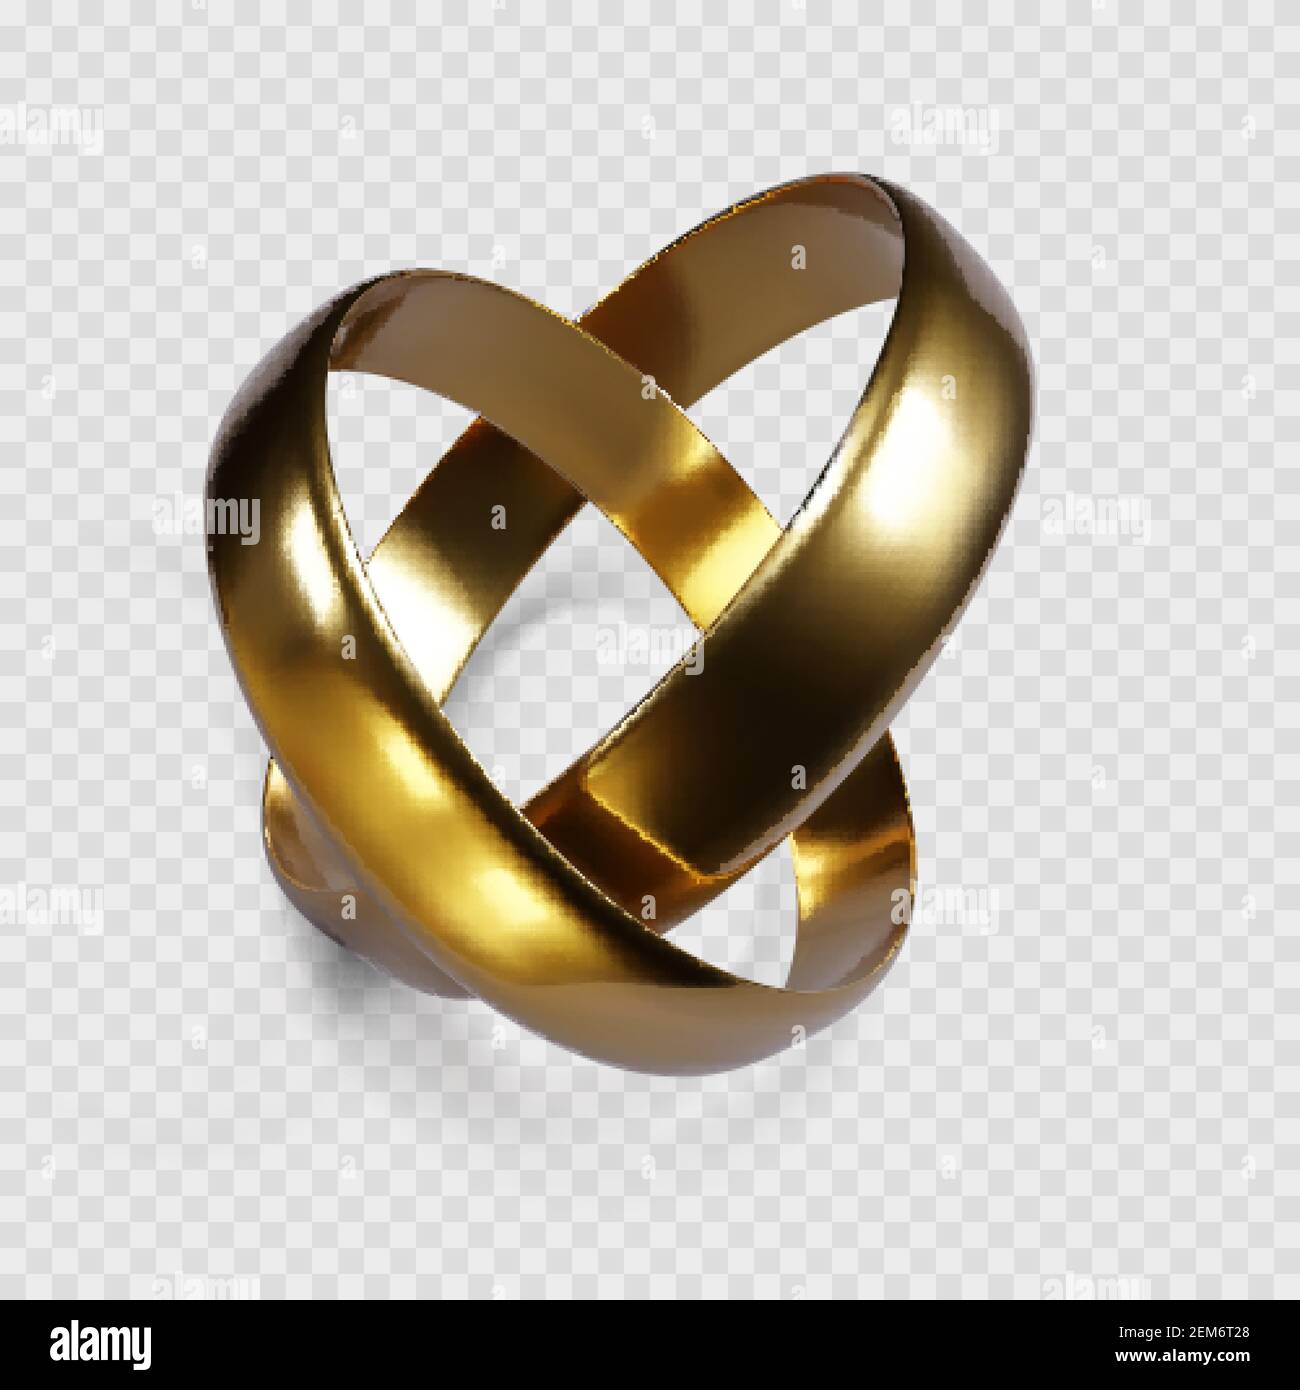 Buy vector gold ring frame icon logo graphic royalty-free vectors